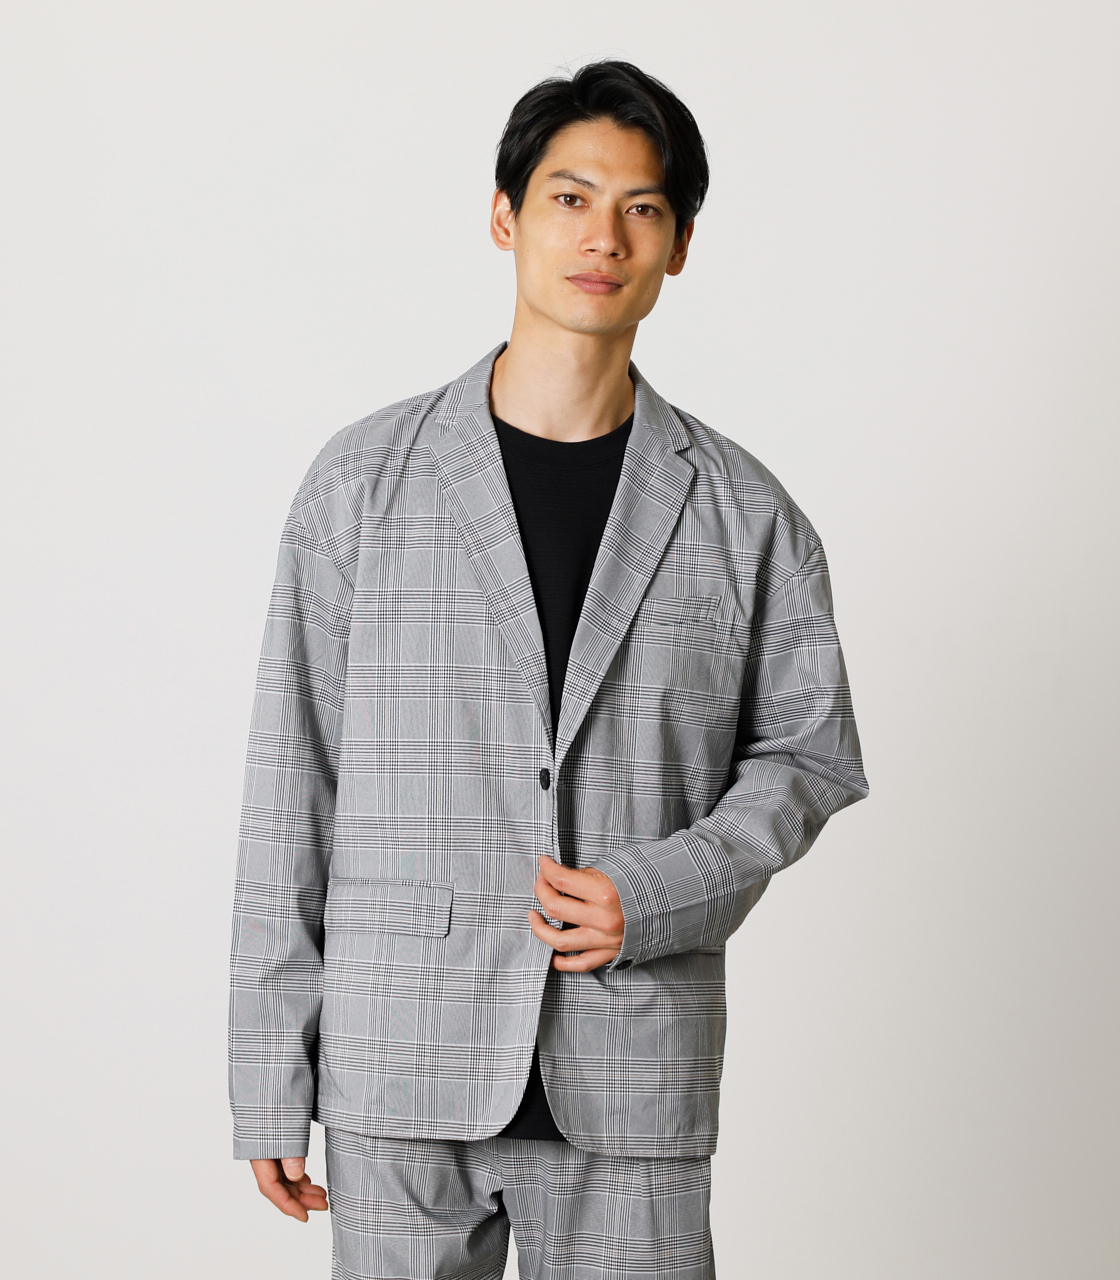 TR RELAX JACKET/TRリラックスジャケット 詳細画像 柄GRY 1